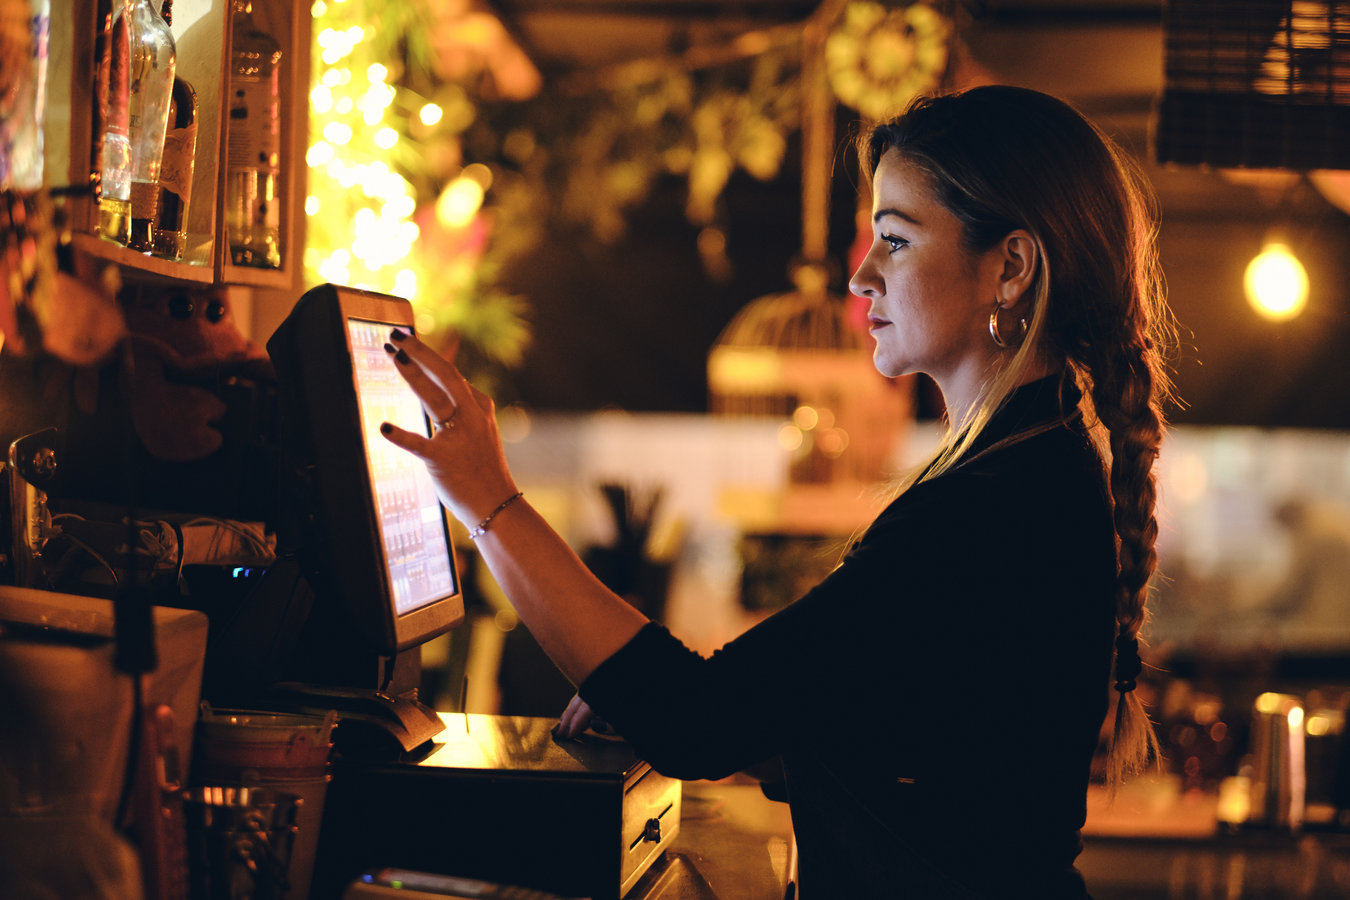 page_59_stock-photo-small-business-people-and-service-concept-a-young-waitress-at-counter-in-a-small-bar-or-1393583258.jpg